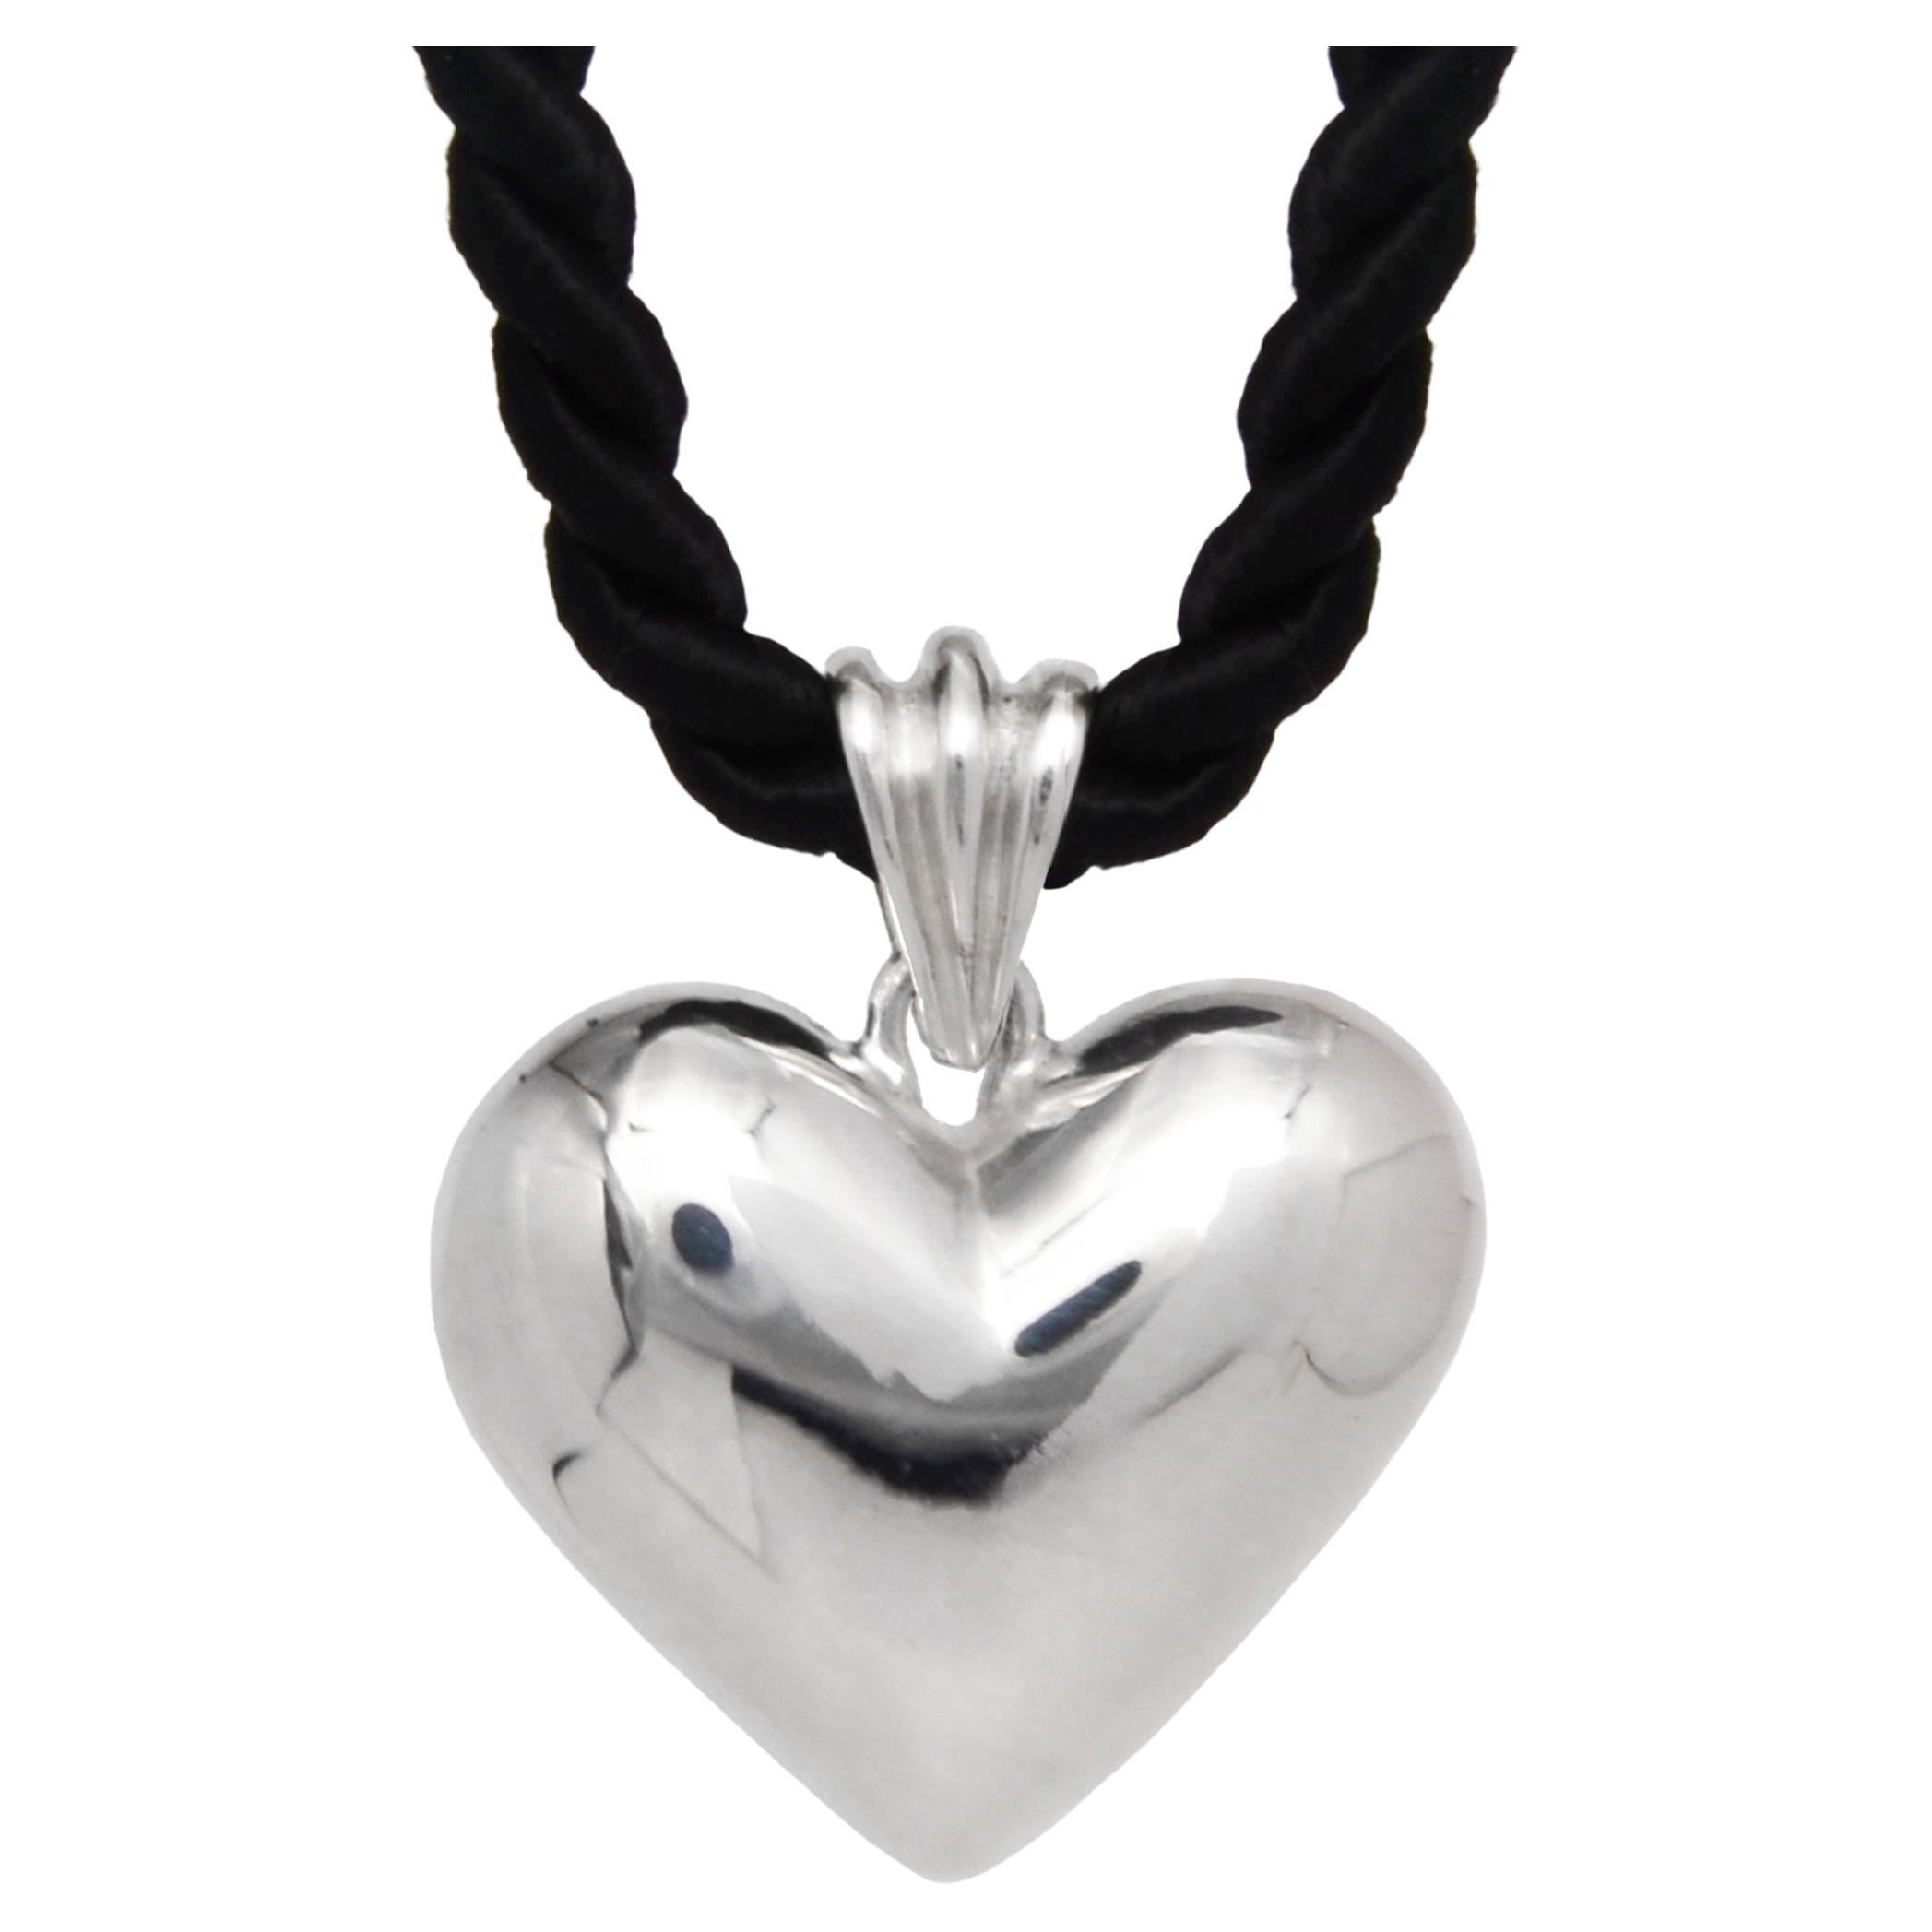 Ruth Nyc, Heavy Heart Pendant in Sterling Silver